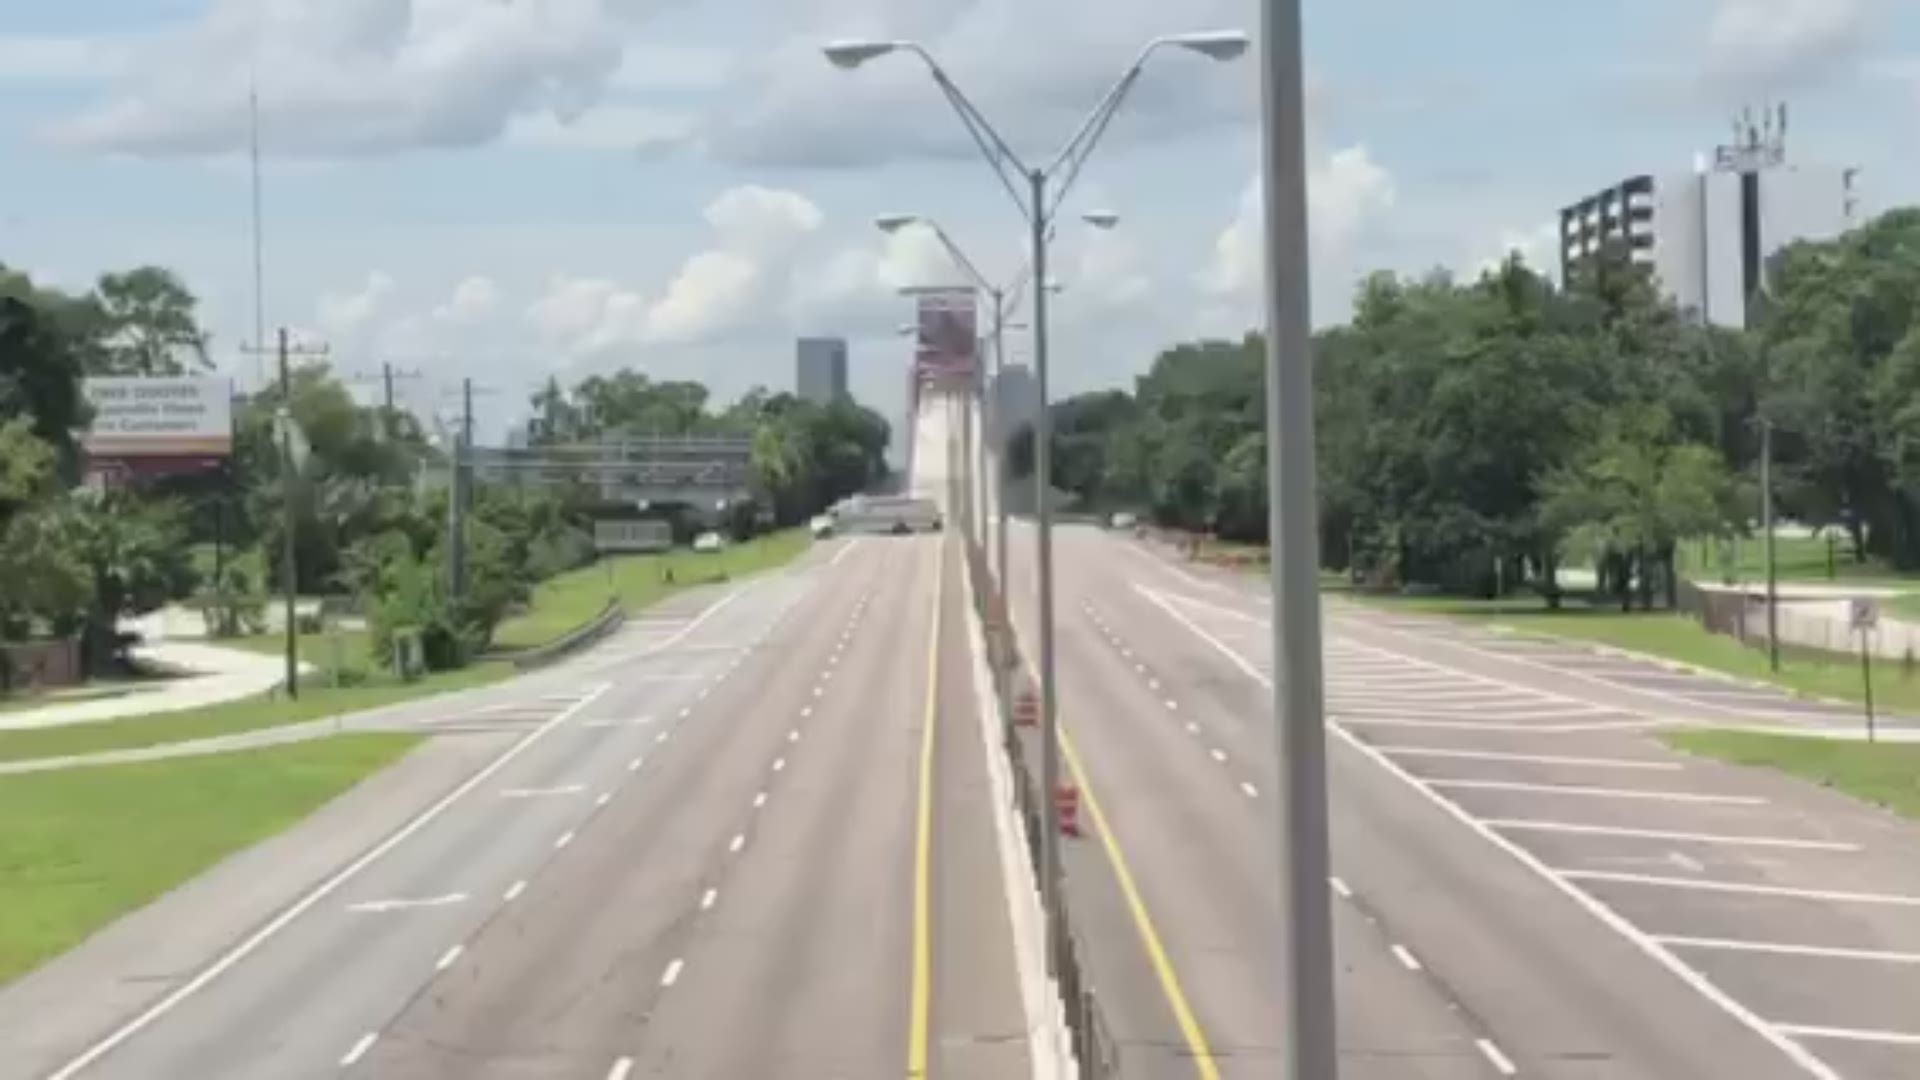 Around 1:08 p.m., the Jacksonville Sheriff's Office said they closed both lanes of the Mathews Bridge due to police activity.